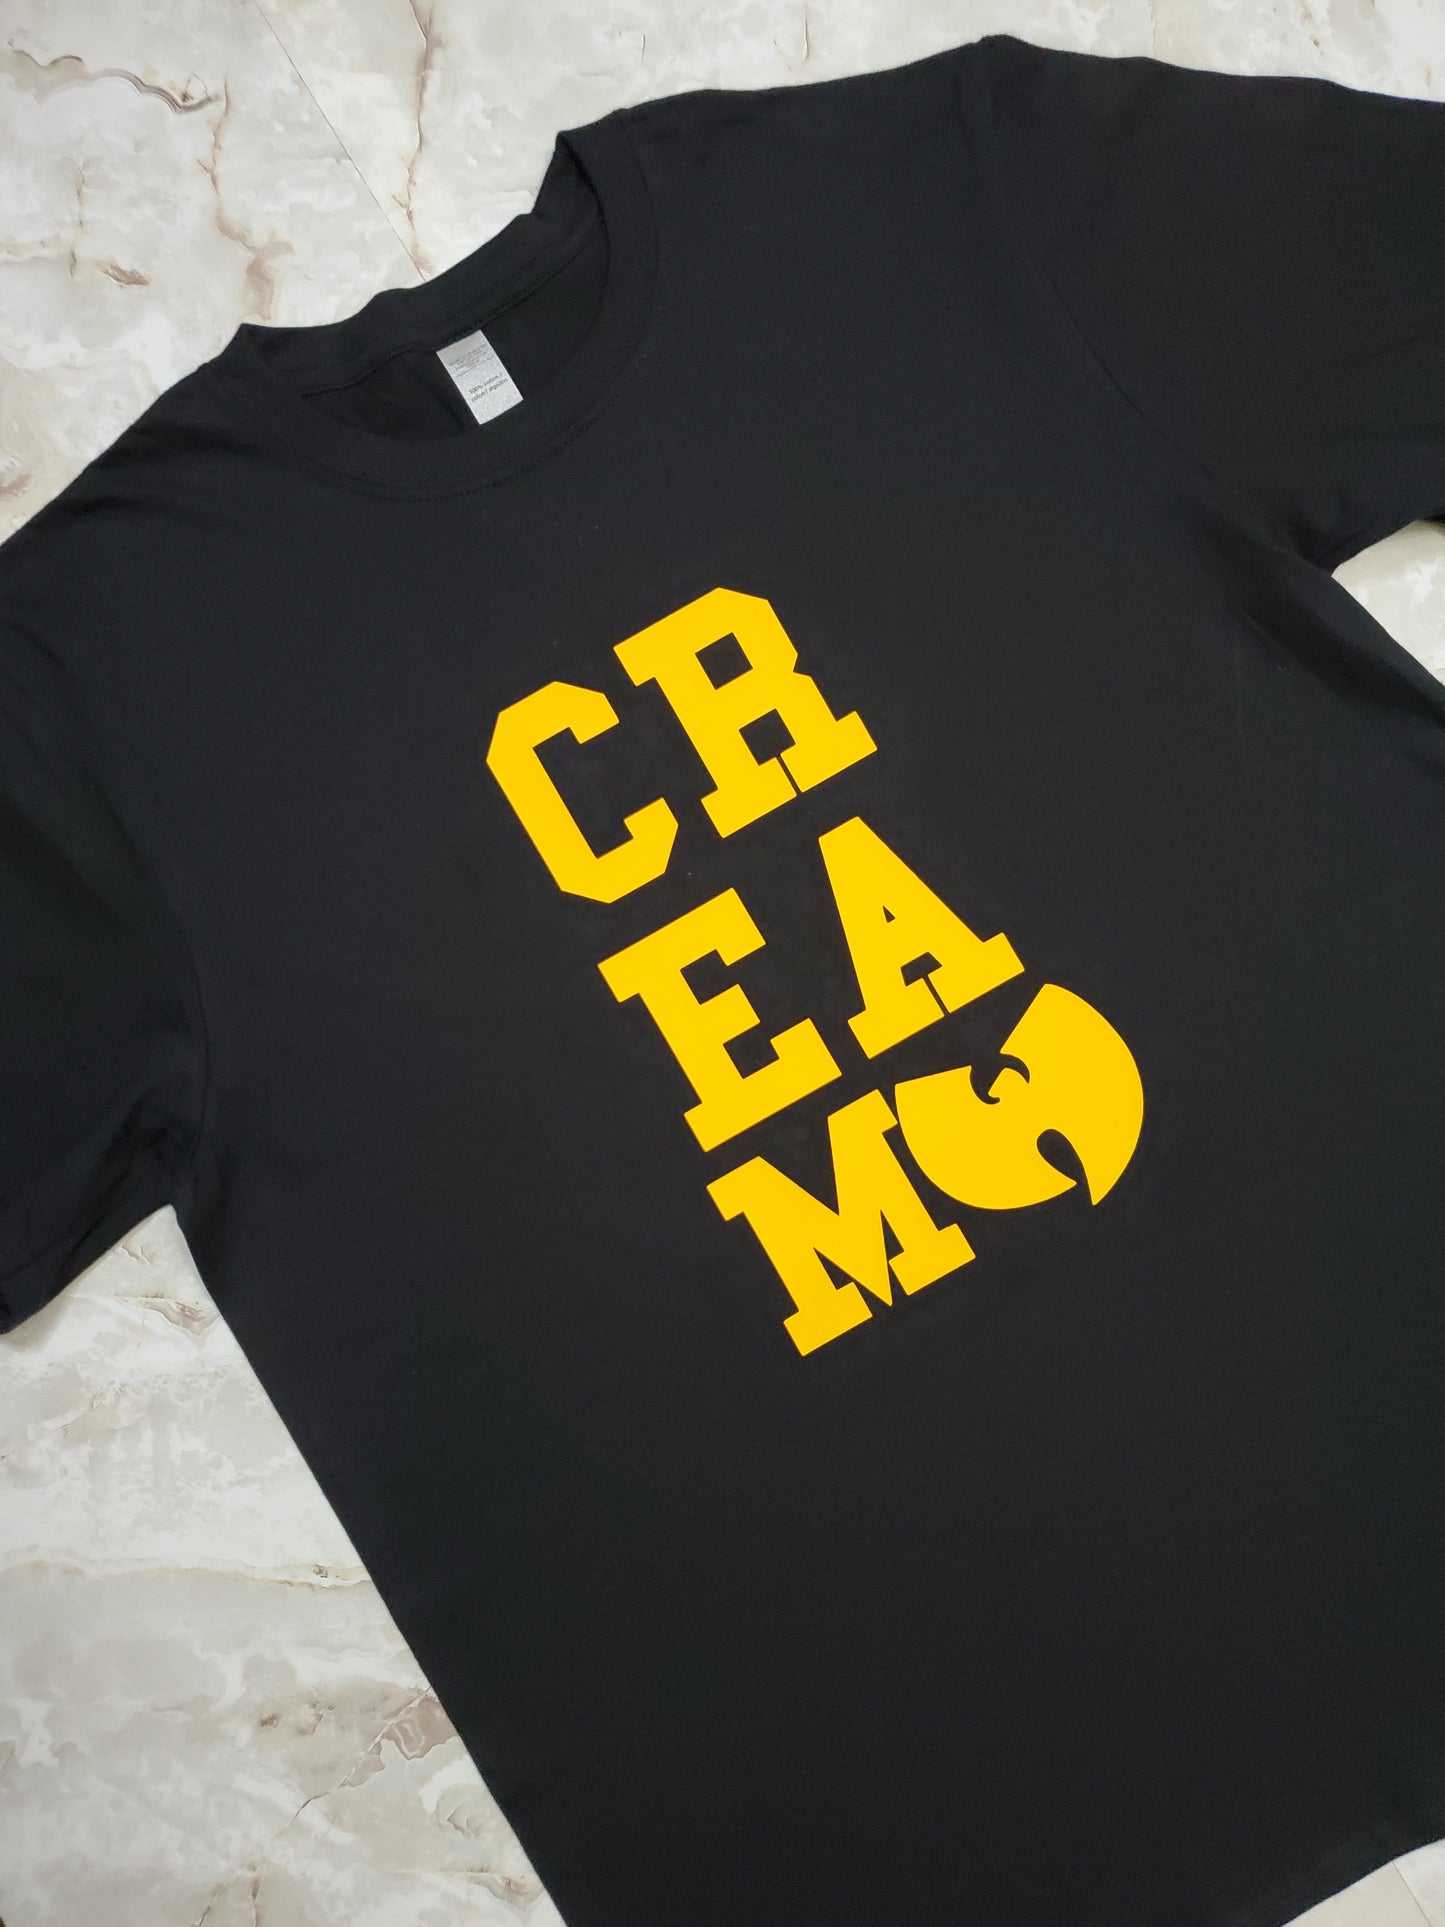 CREAM T-Shirt - Centre Ave Clothing Co.